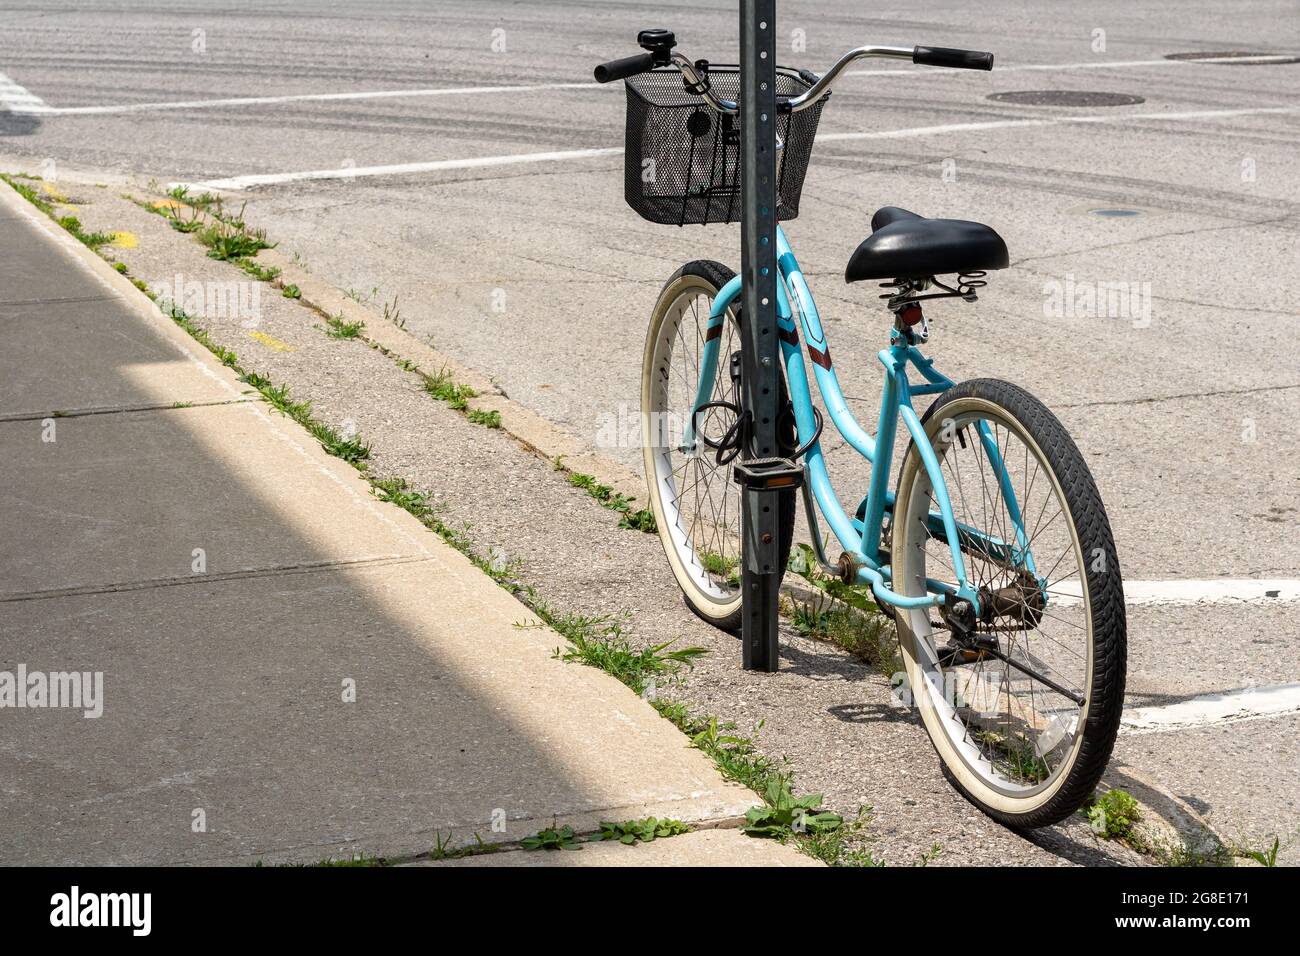 Blue cruiser bike with black basket leaning against and locked to a traffic sign pole. Stock Photo